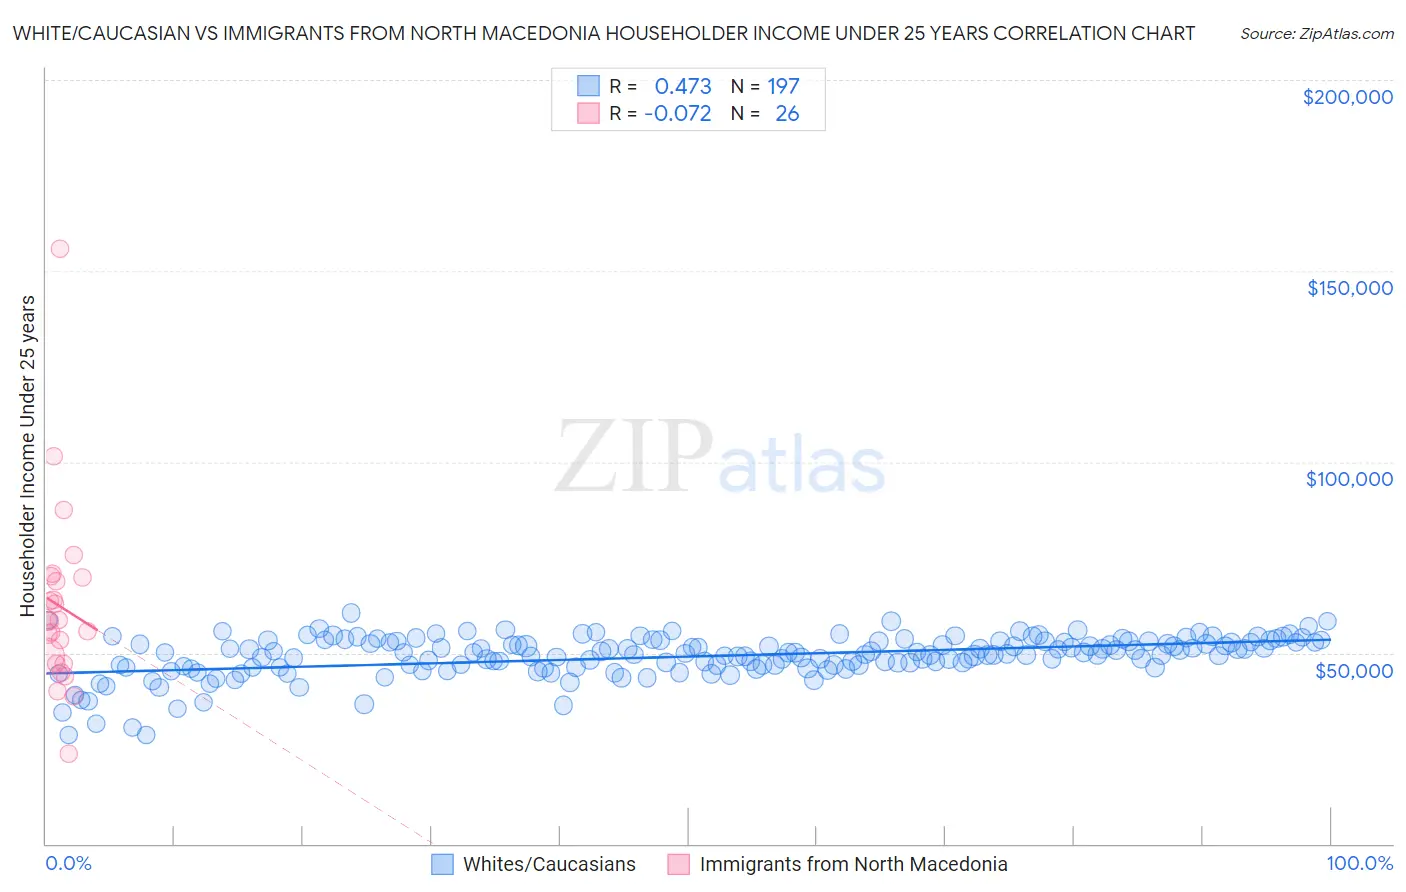 White/Caucasian vs Immigrants from North Macedonia Householder Income Under 25 years